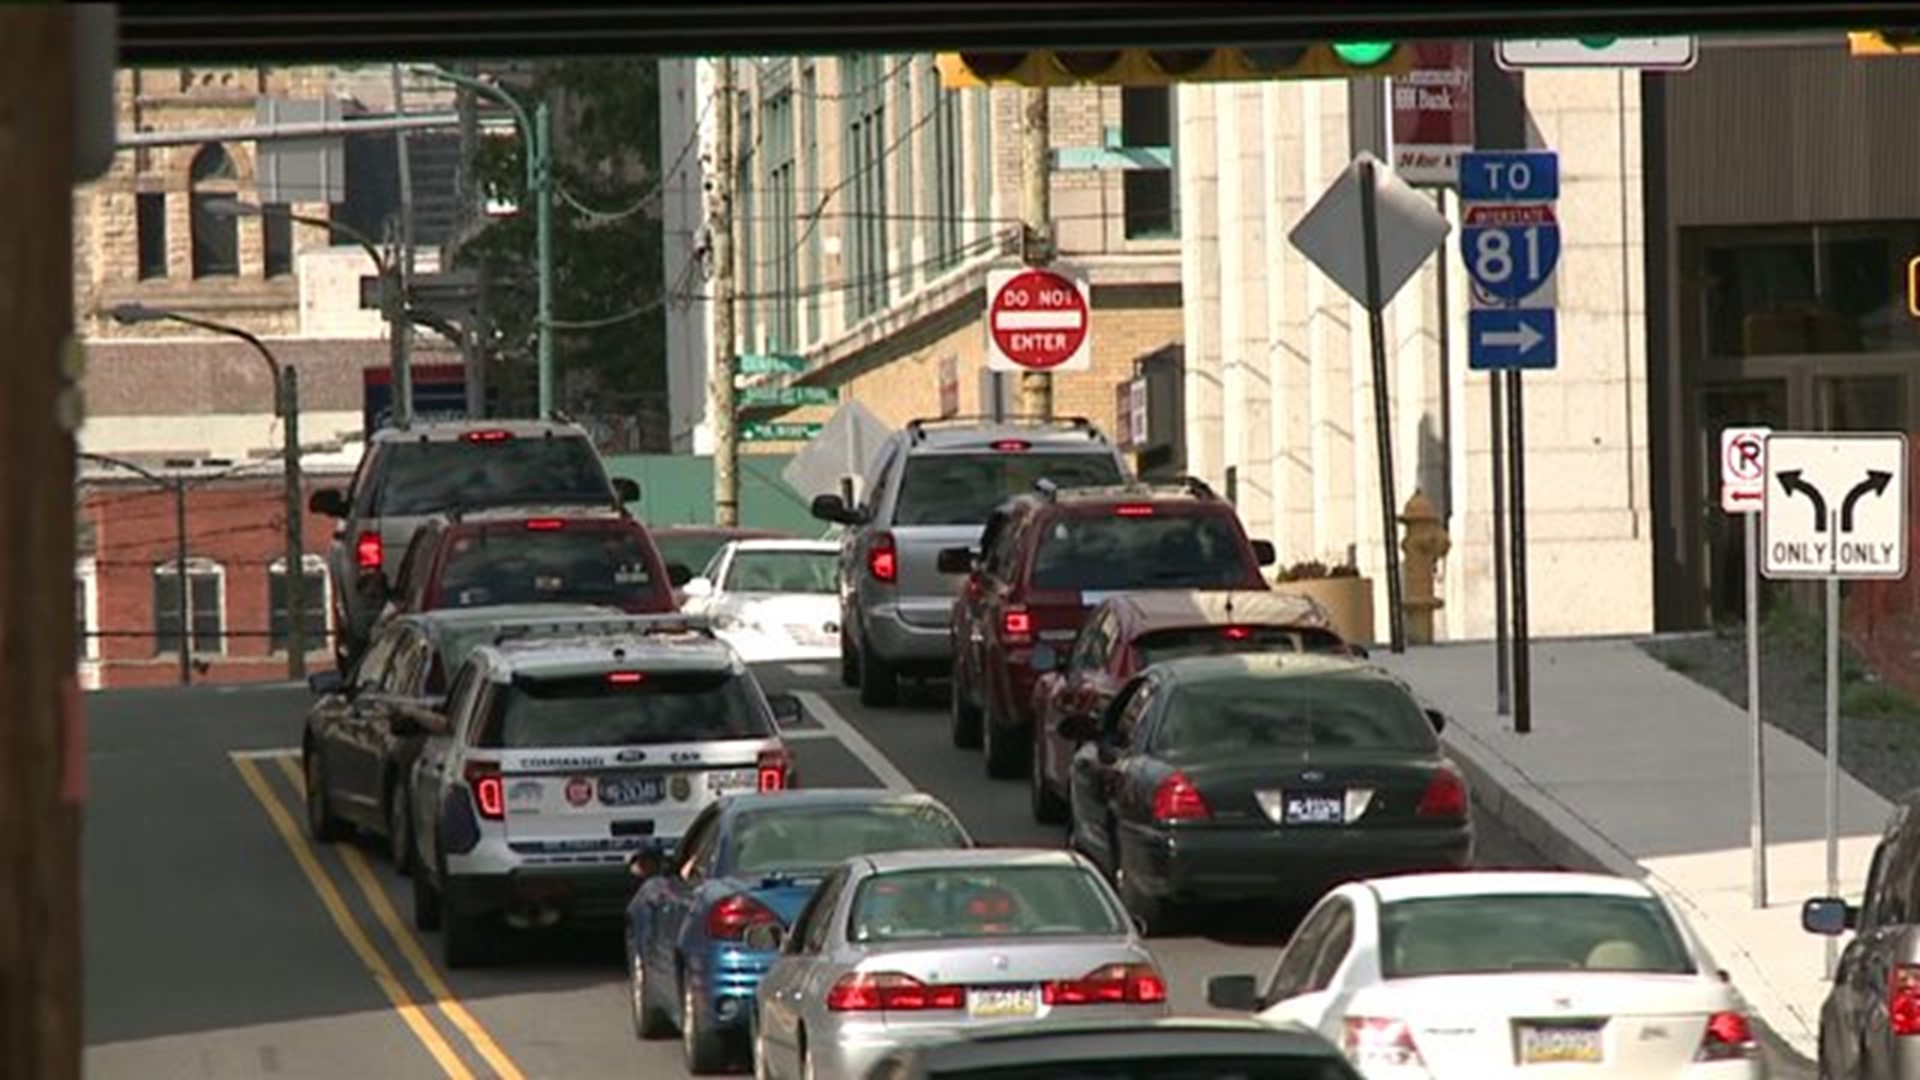 Scranton Commuter Tax Passes First Round of Votes